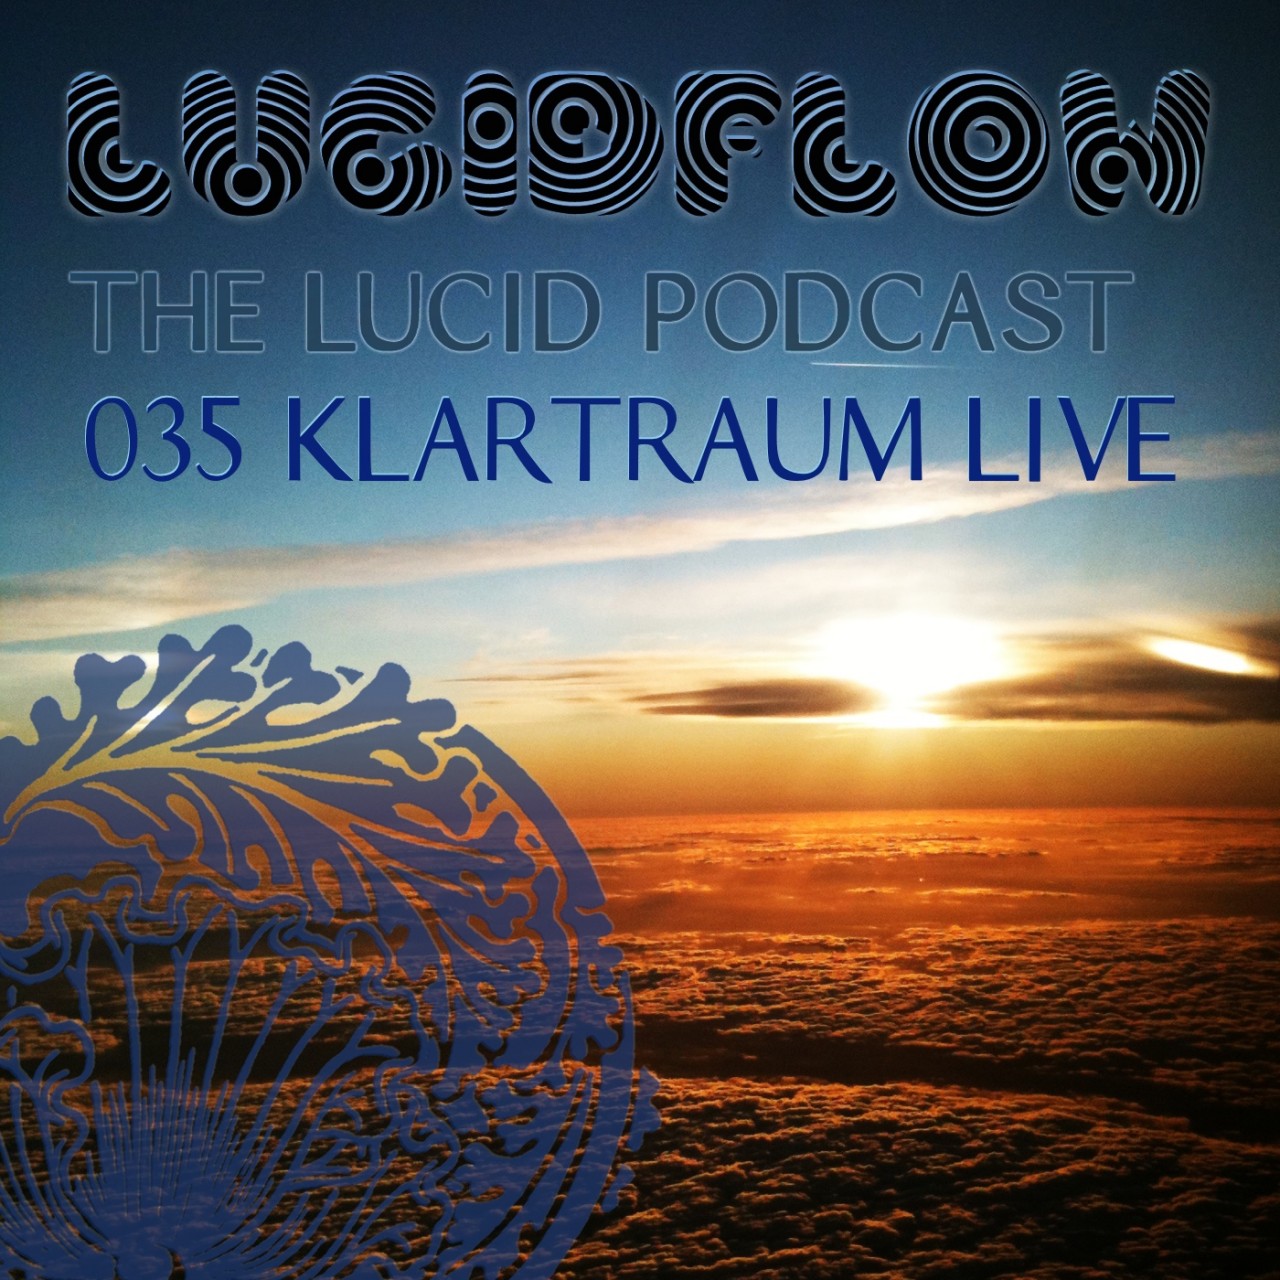 The Lucid Podcast: 035 – Klartraum Live